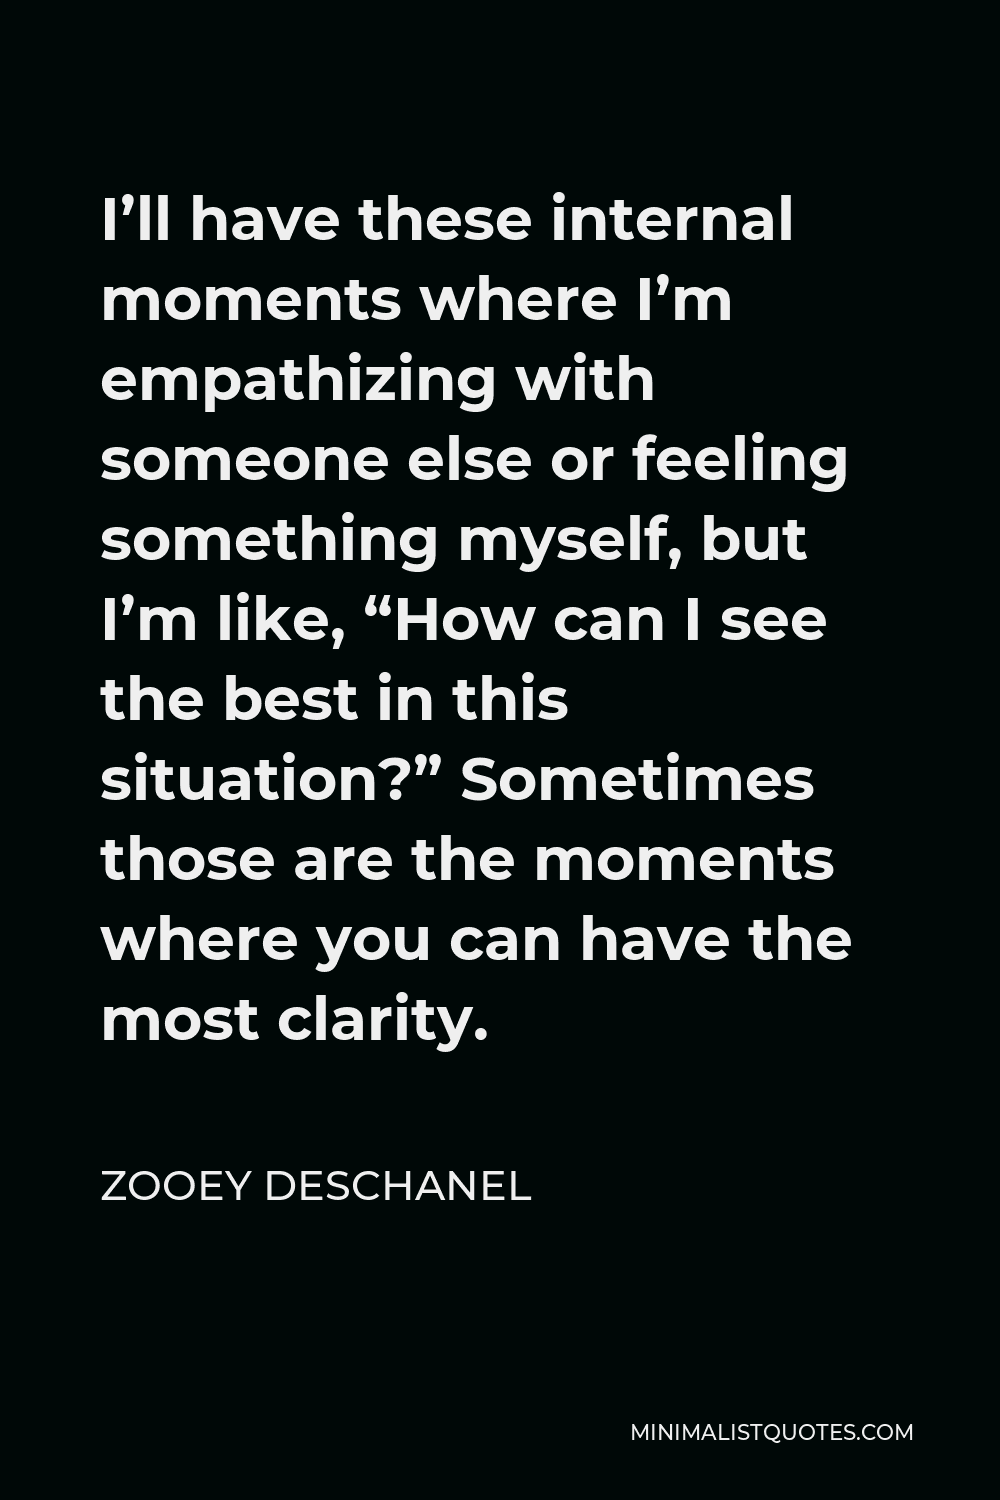 Zooey Deschanel Quote - I’ll have these internal moments where I’m empathizing with someone else or feeling something myself, but I’m like, “How can I see the best in this situation?” Sometimes those are the moments where you can have the most clarity.